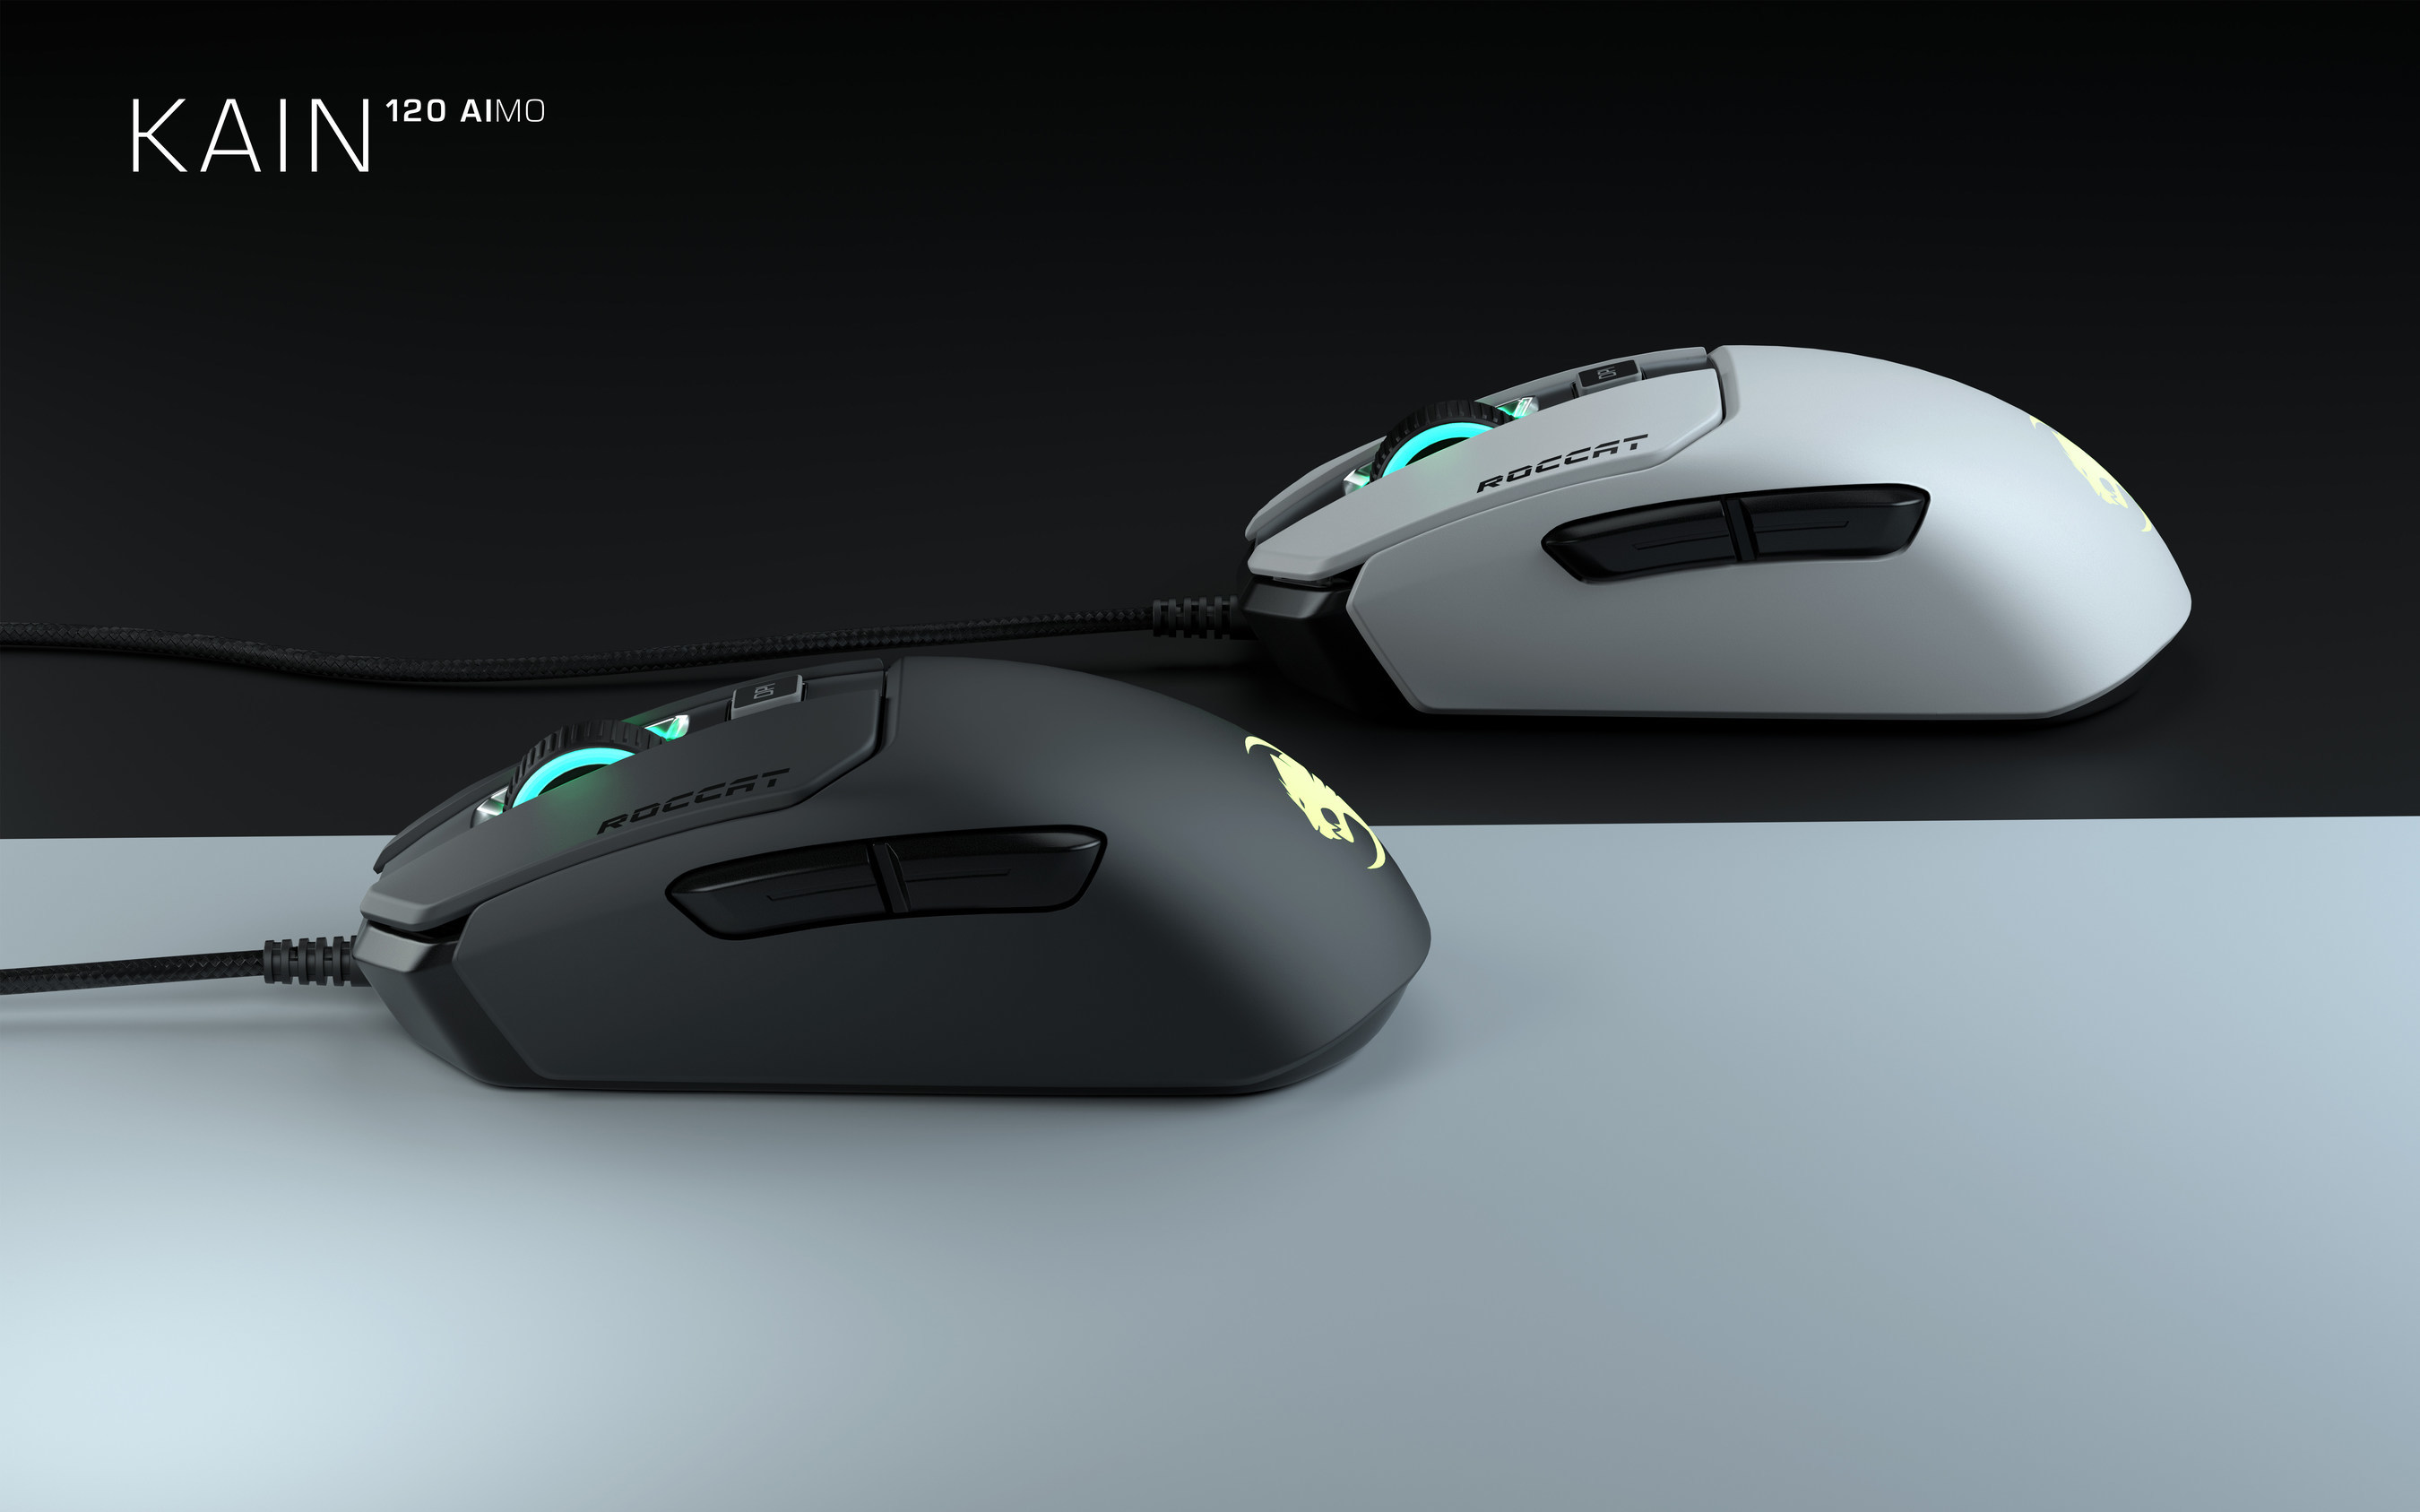 Roccat S All New Kain Gaming Mouse Series New Vulcan Keyboard Switch And Color Options And The Sense Aimo Pad Make Their European Debut At Gamescom 19